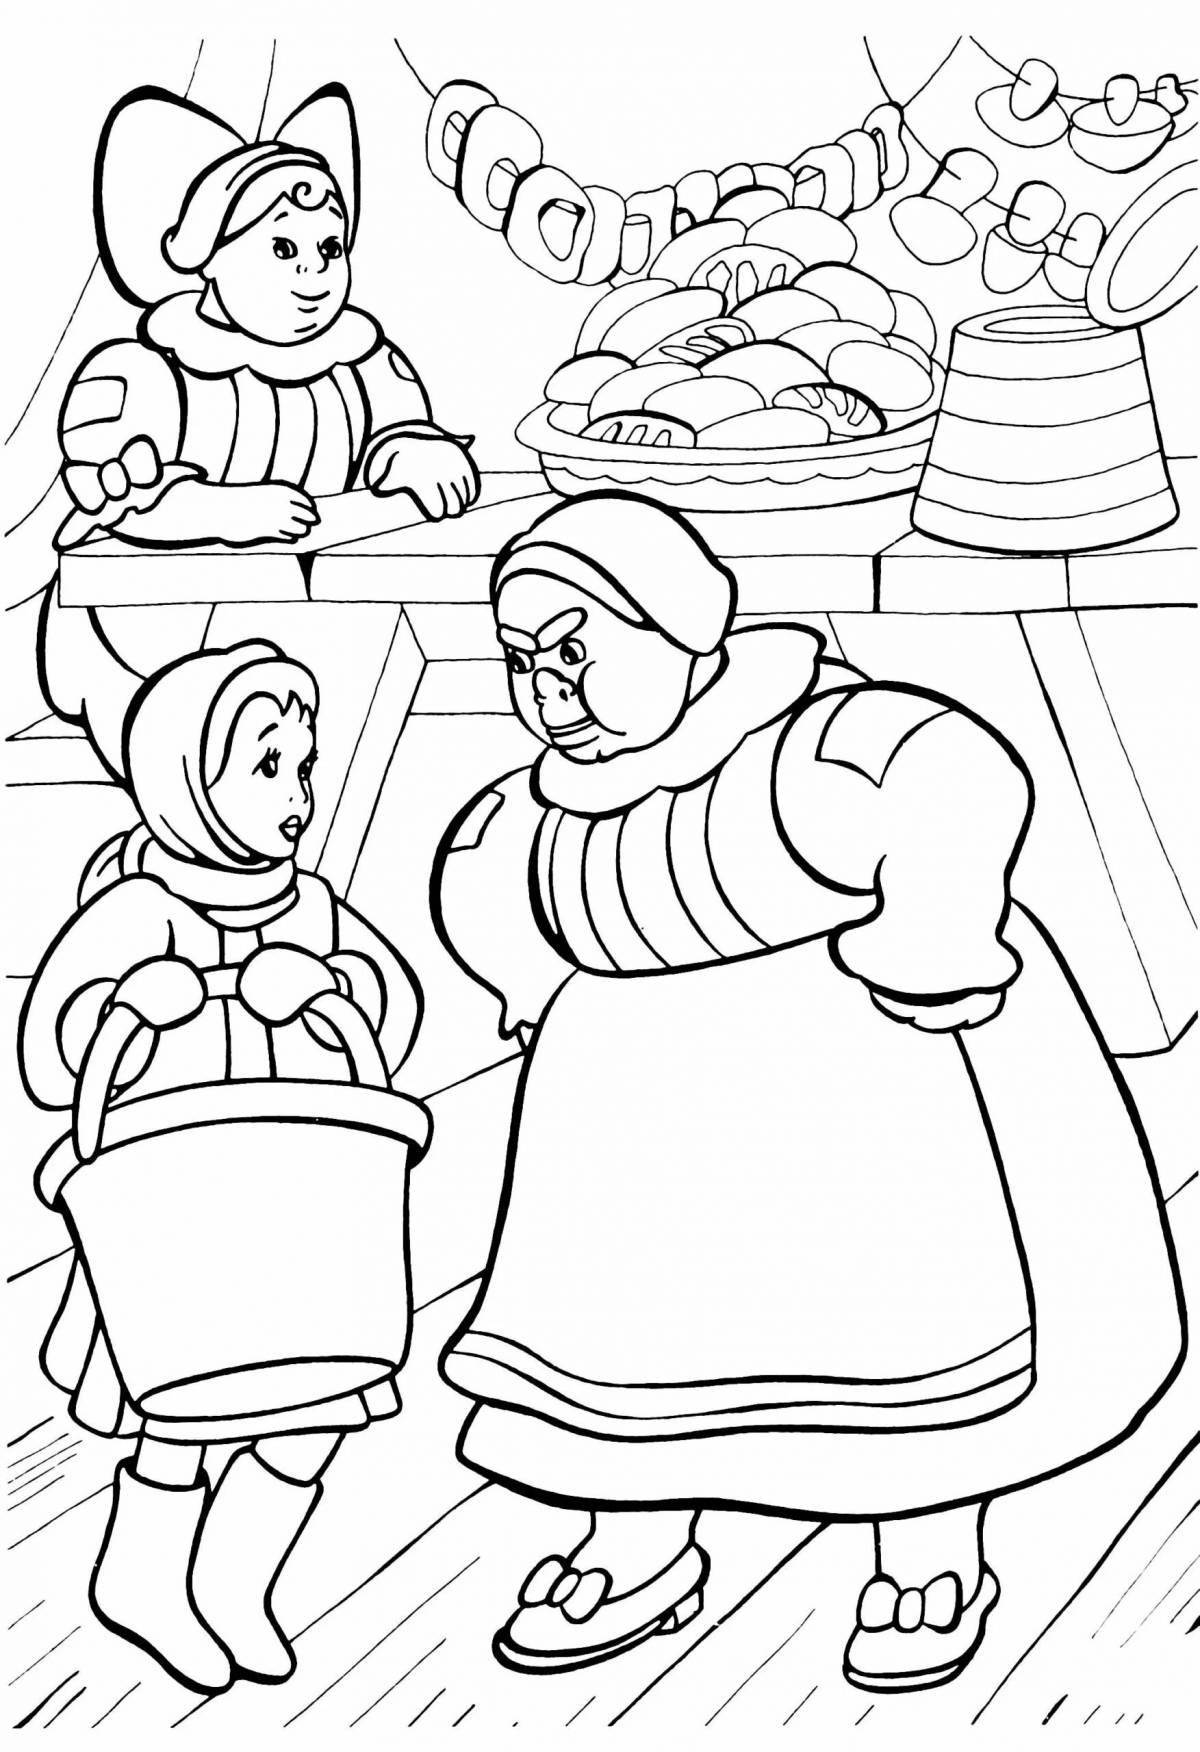 Intense coloring page 12